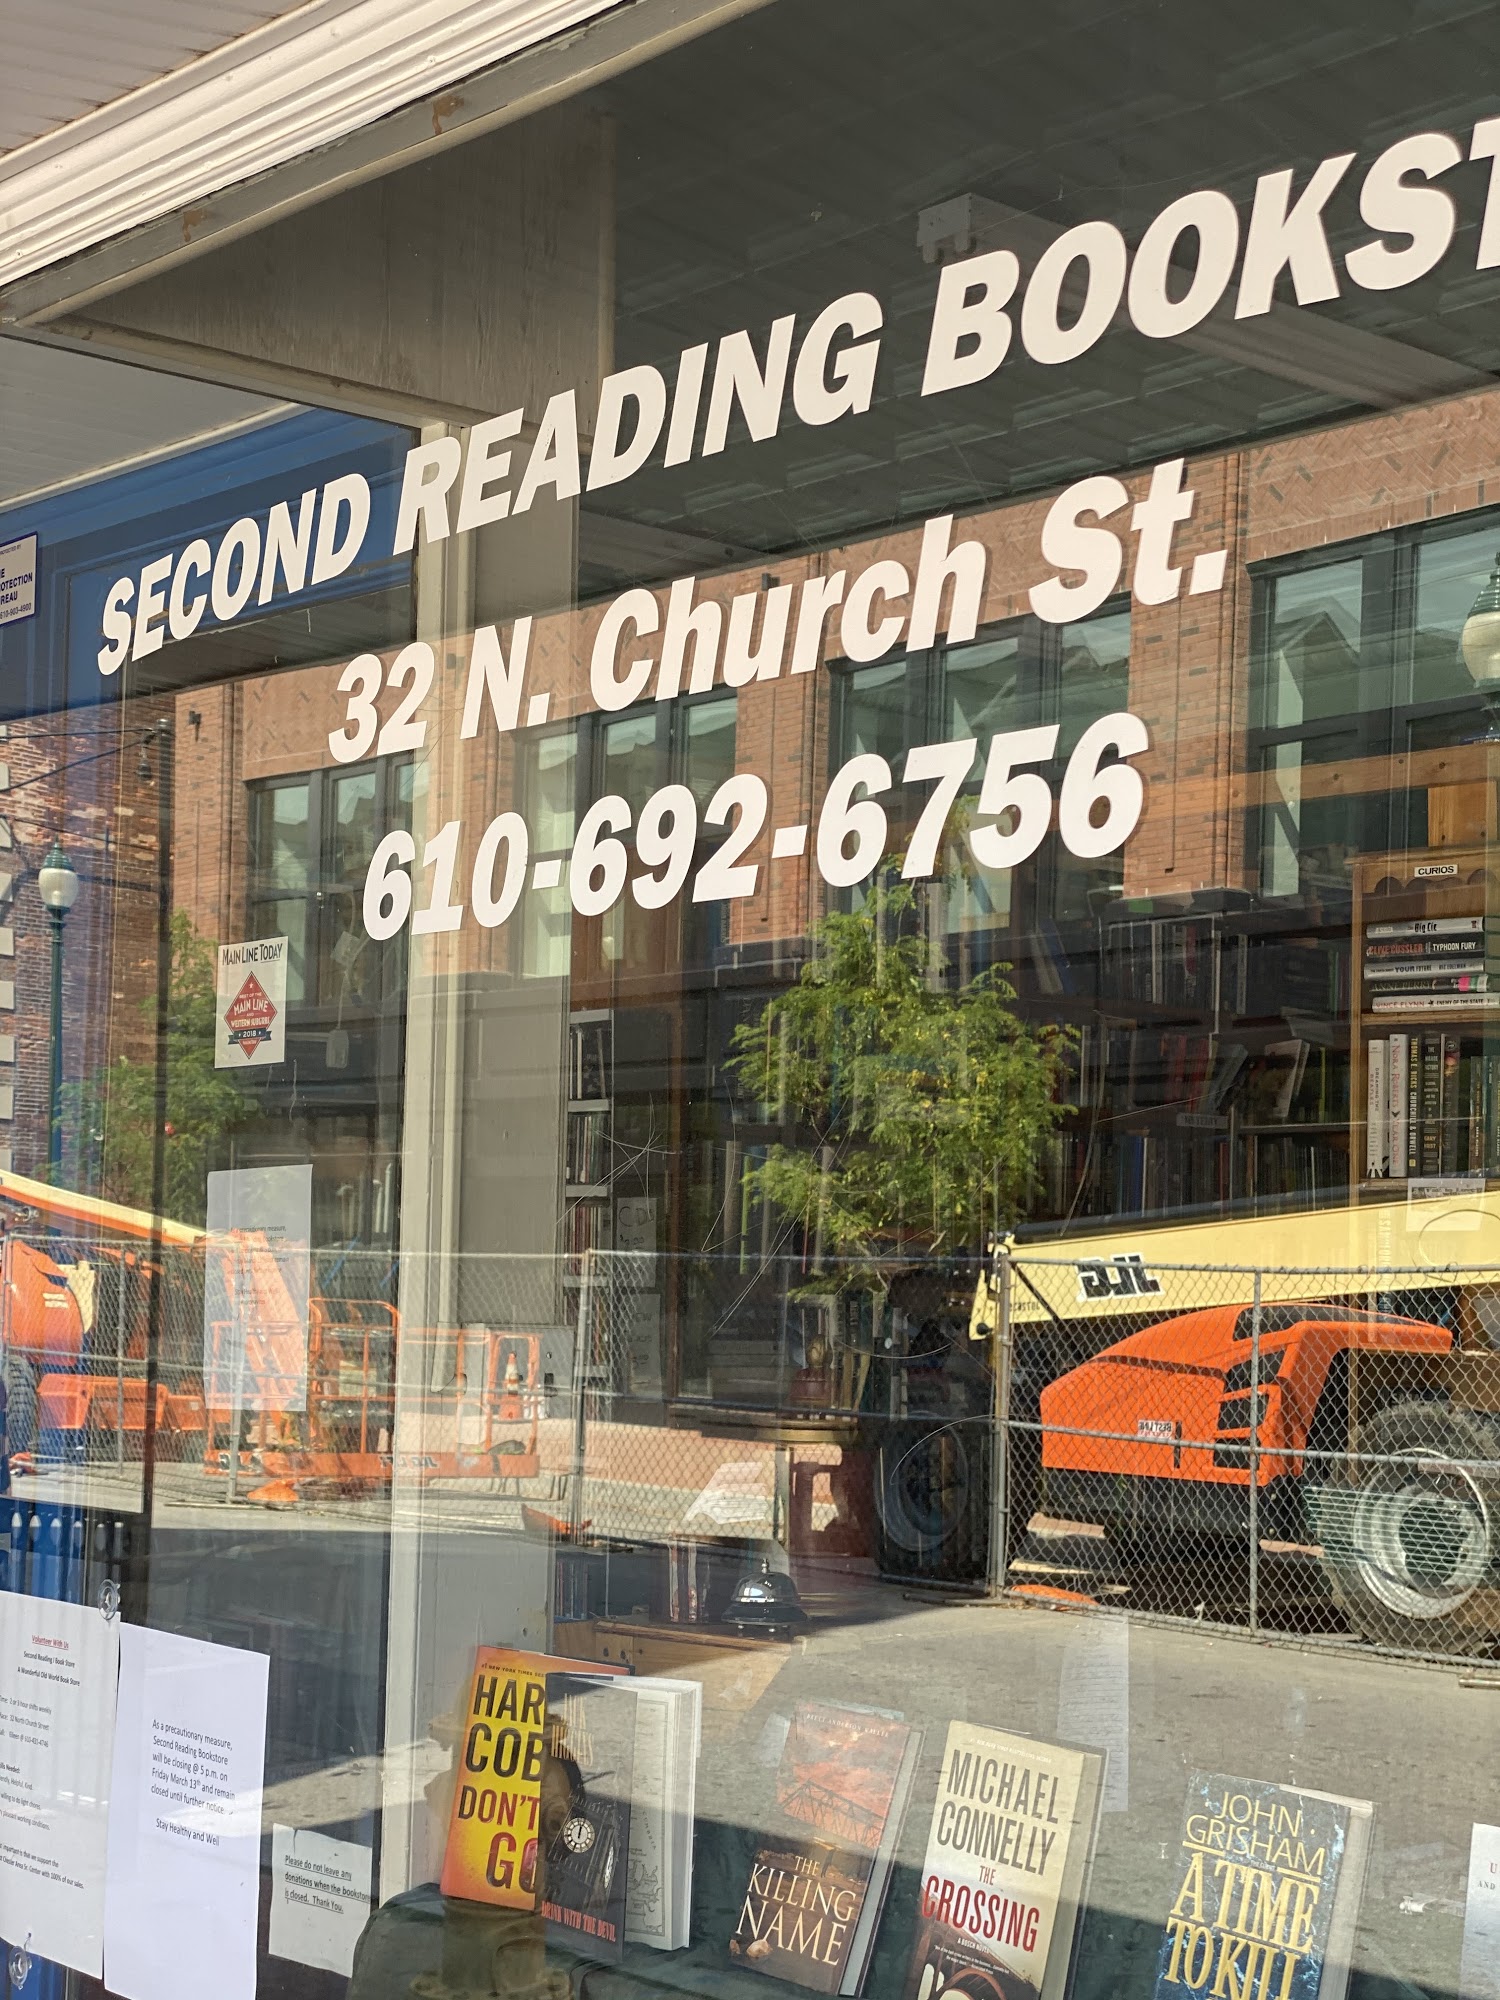 Second Reading Book Store